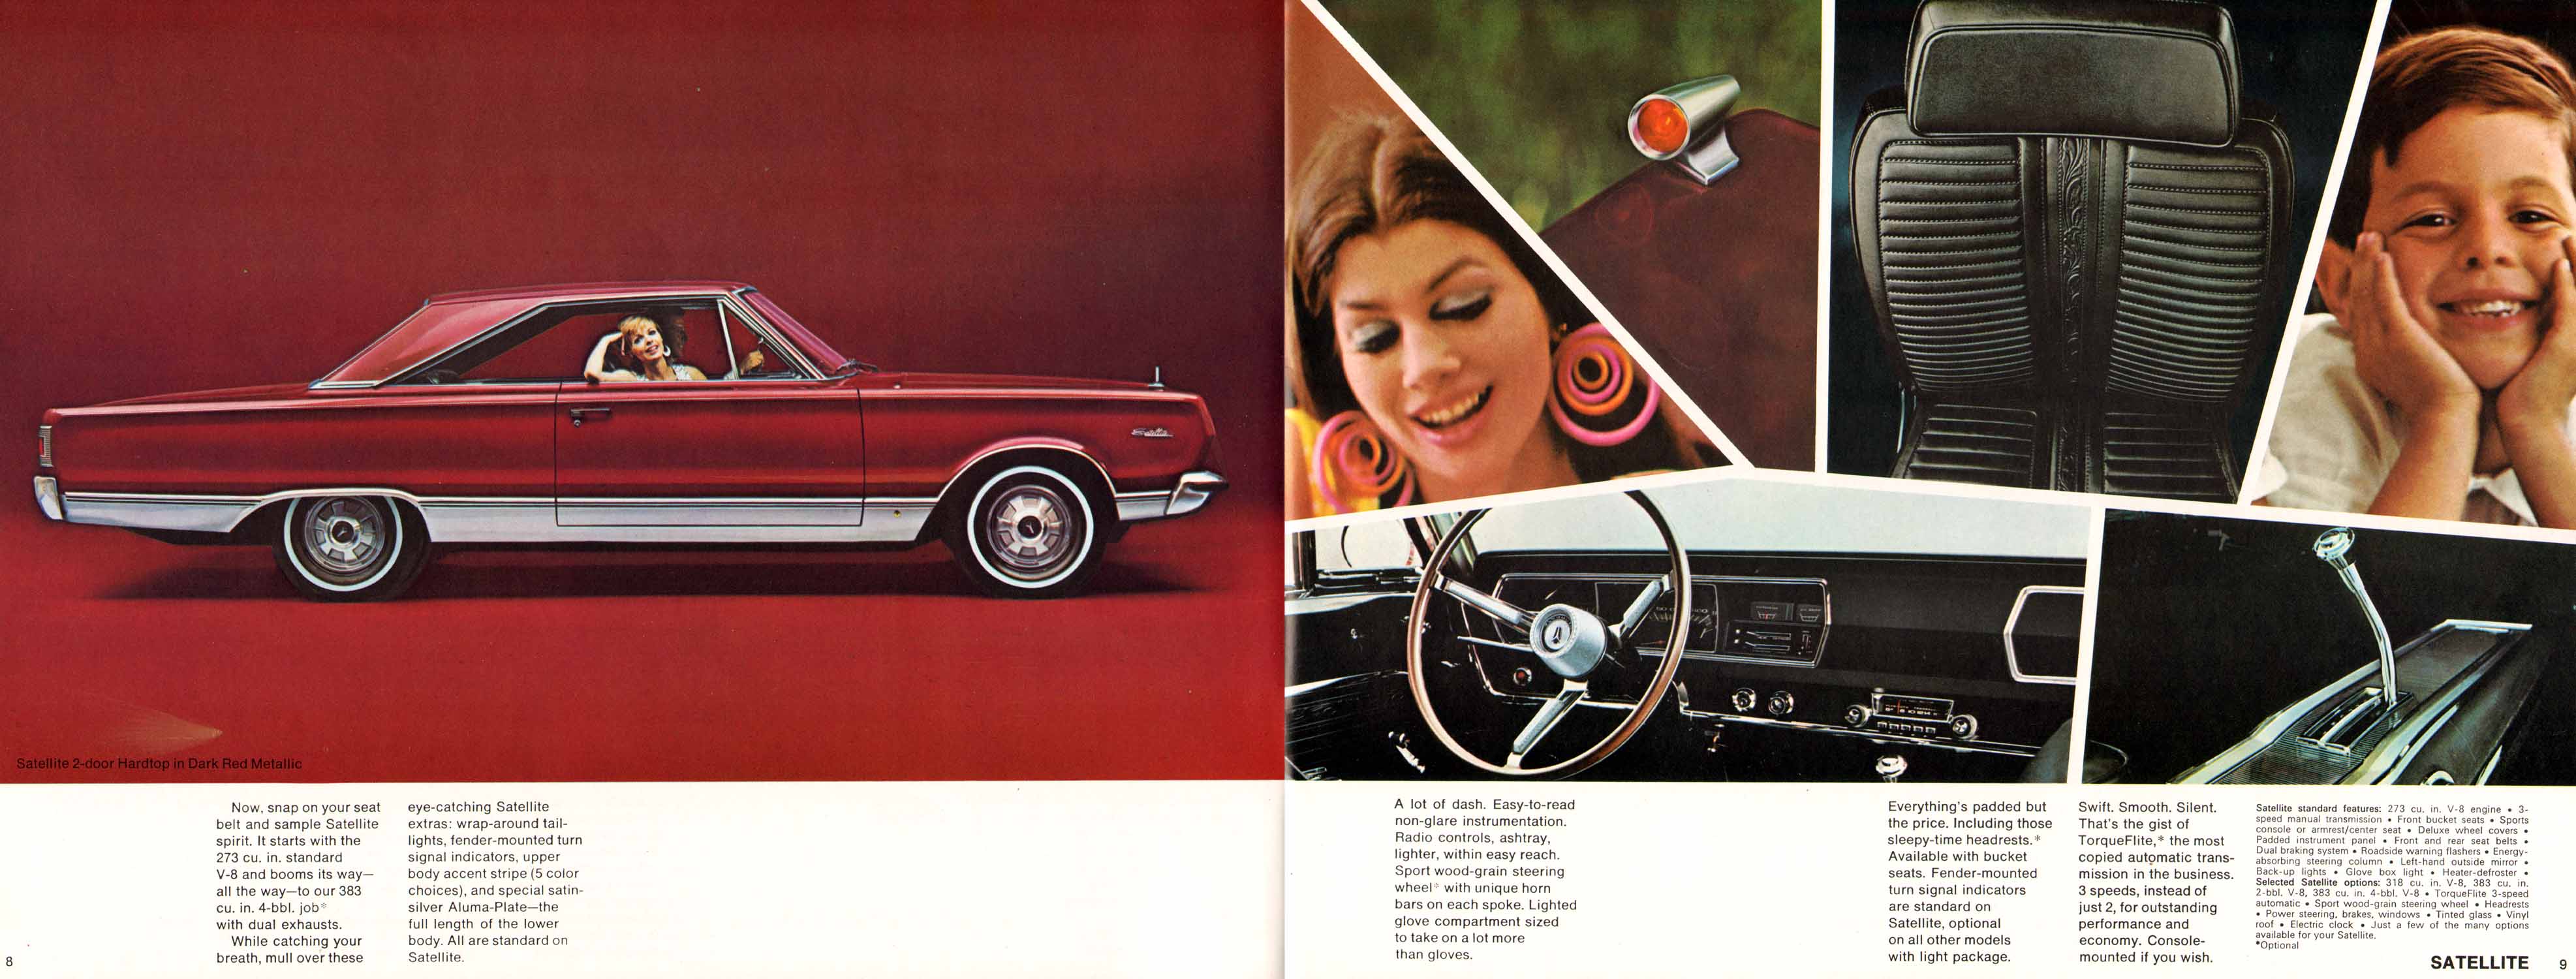 1967_Plymouth_Belvedere-08-09